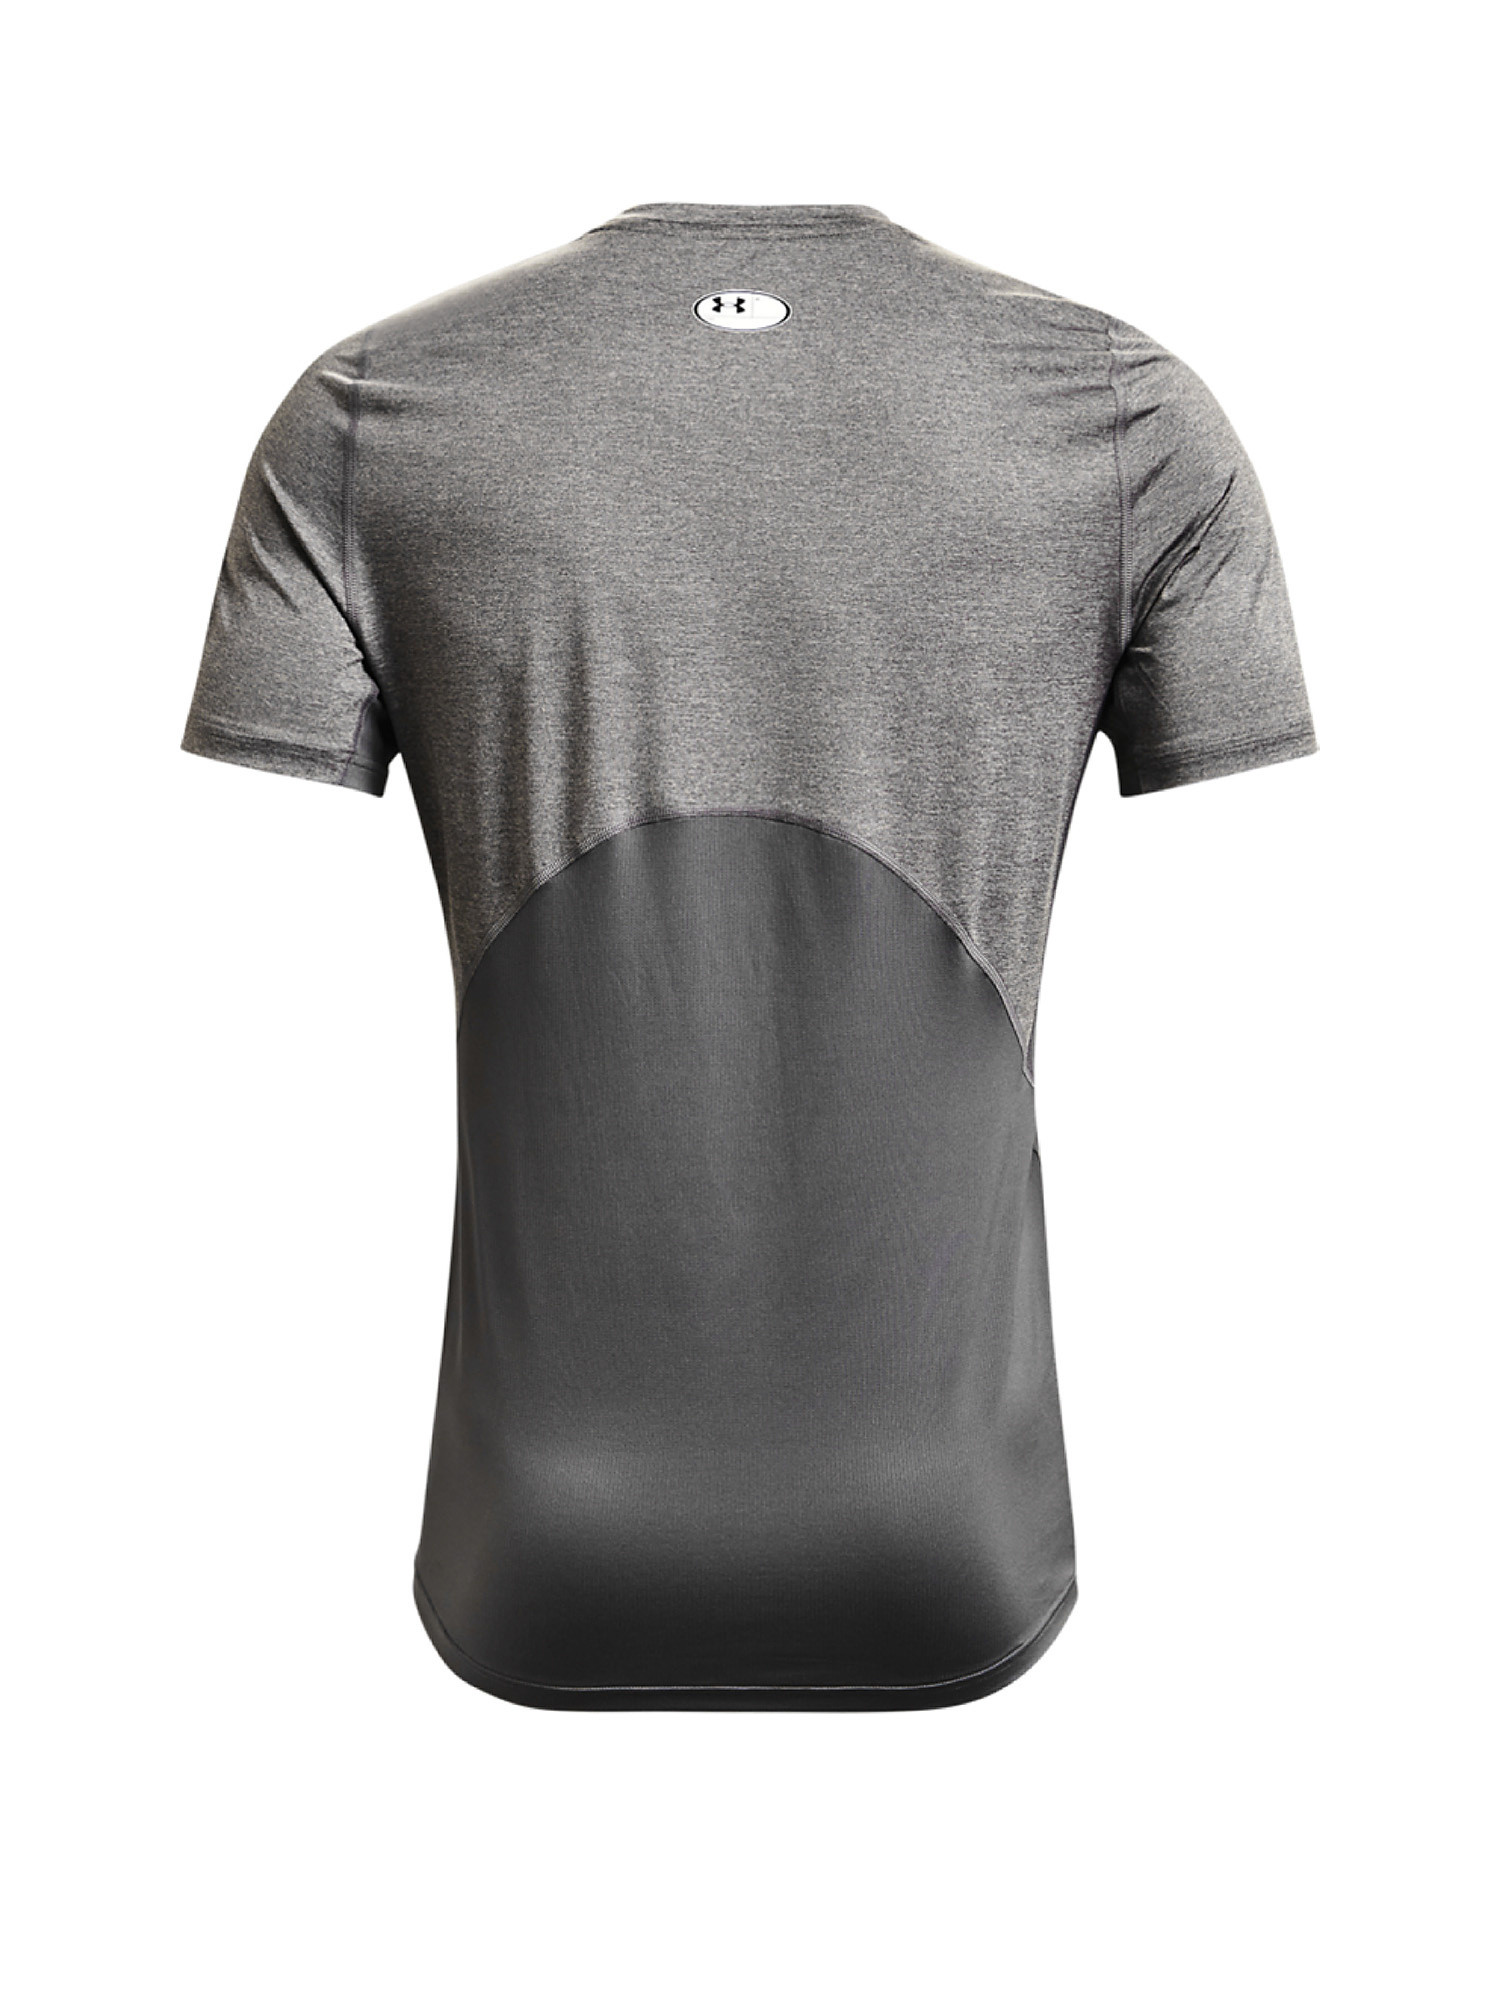 Under Armour - HeatGear® Armor Fitted Short Sleeve Shirt, Grey, large image number 1